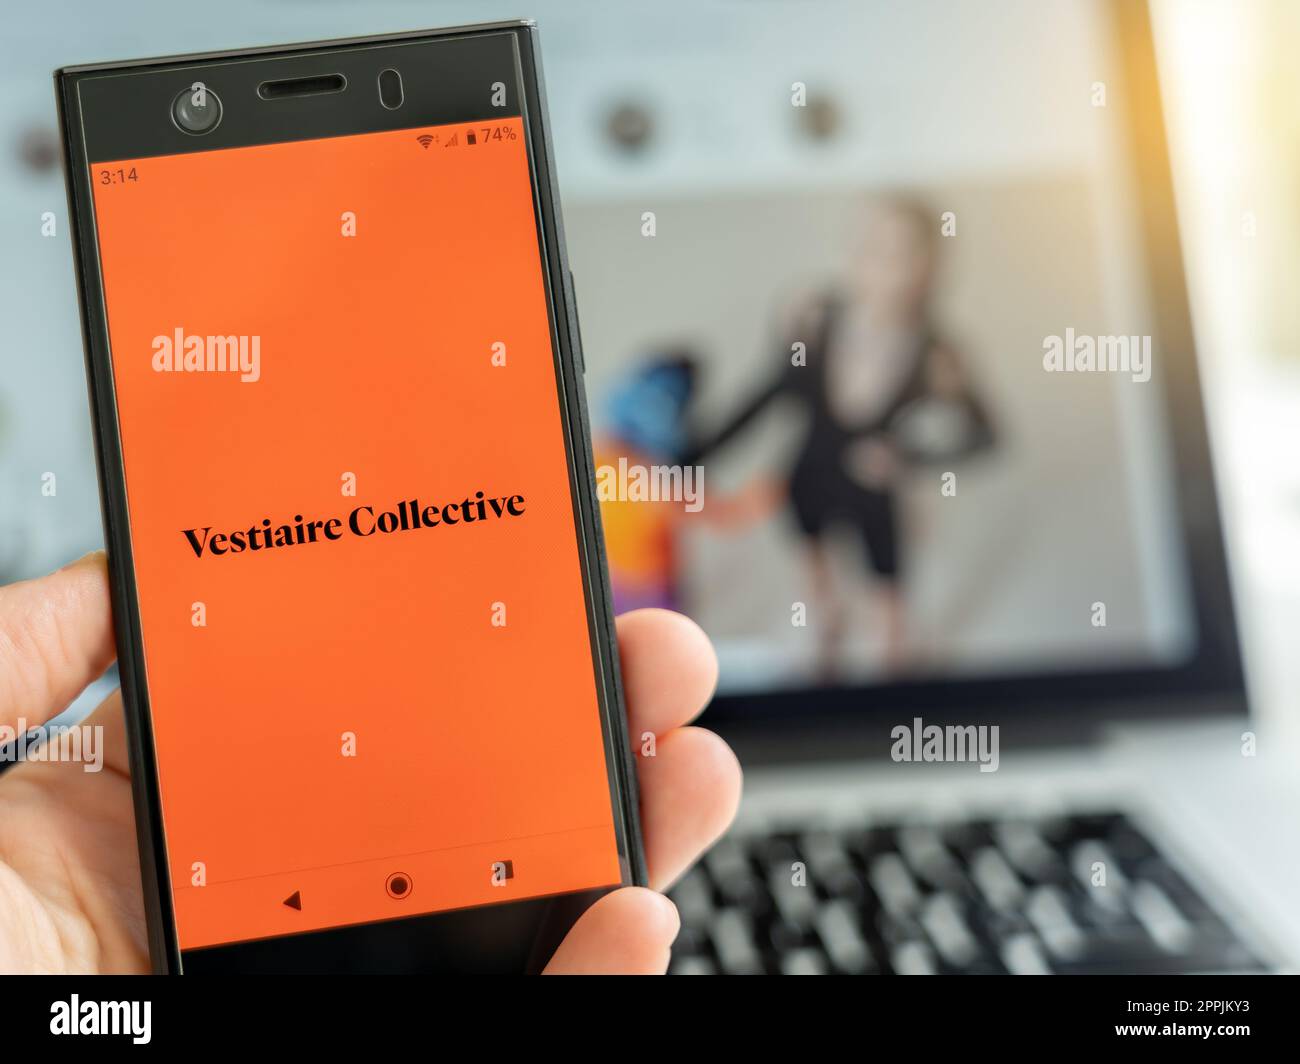 Milan, Italy - 10 13 2021: Installing Vestiaire Collective app for smartphone. Stock Photo